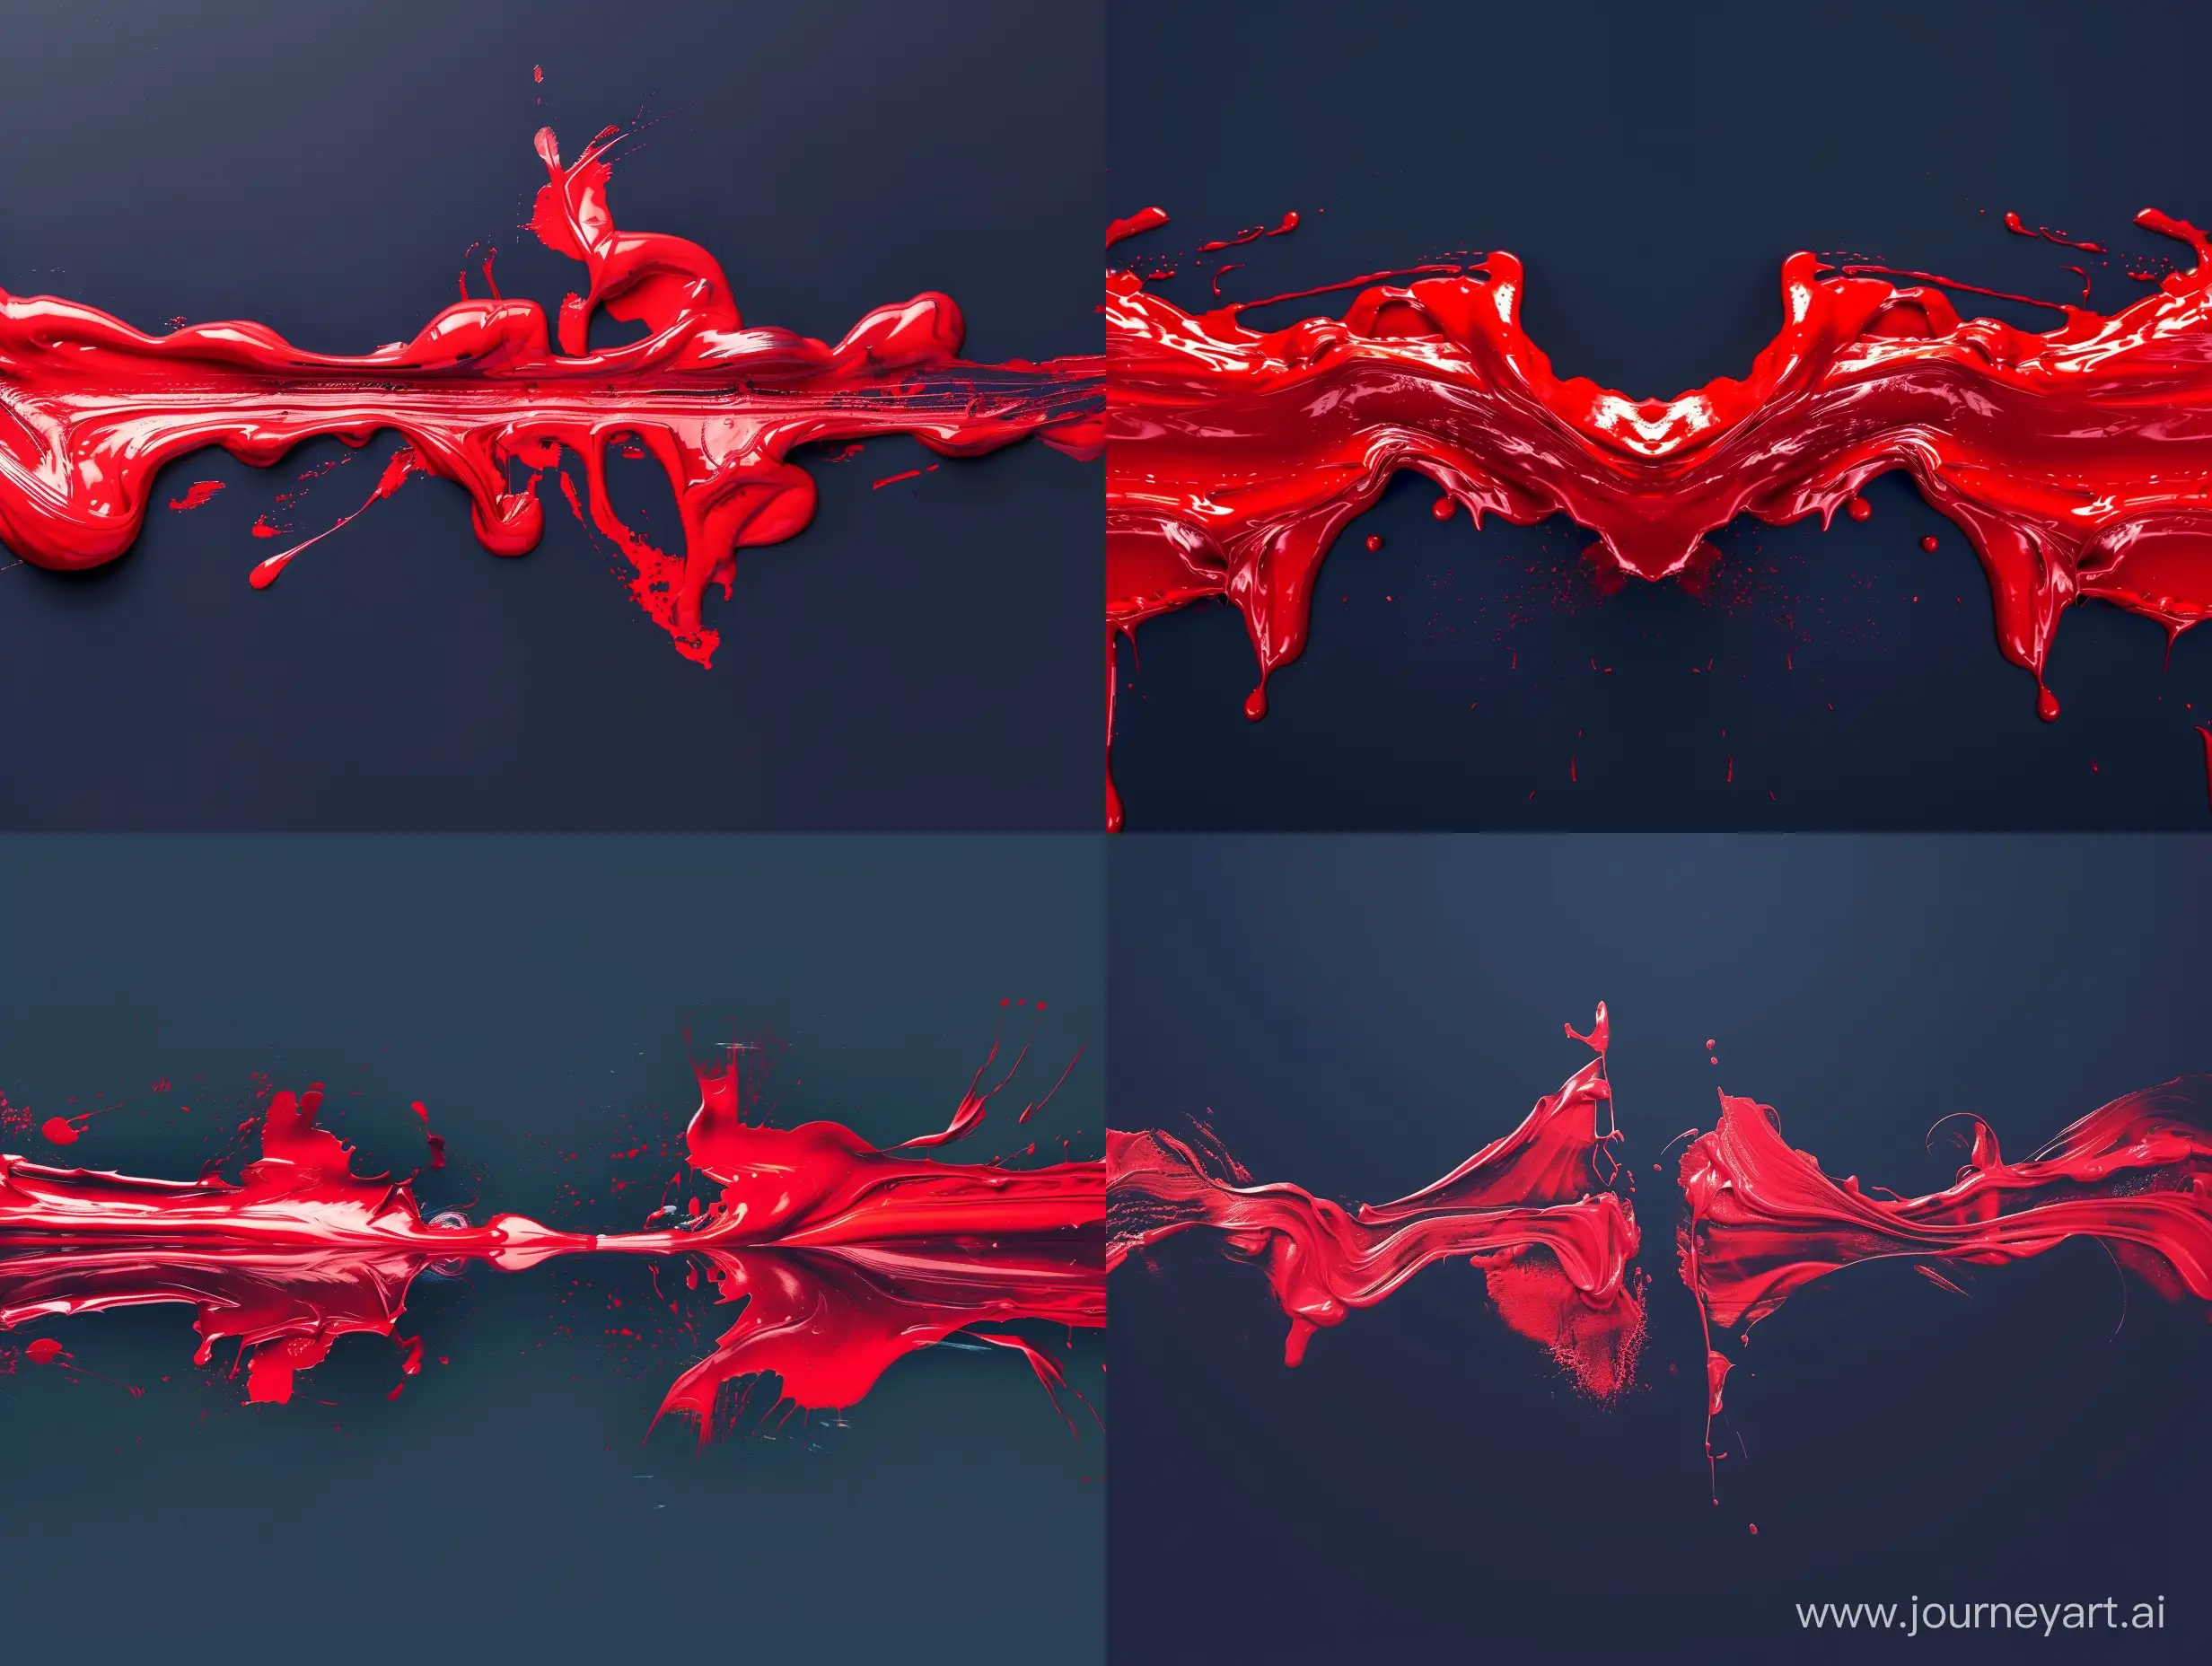 Symmetrical-Red-Paint-Flowing-on-Dark-Blue-Background